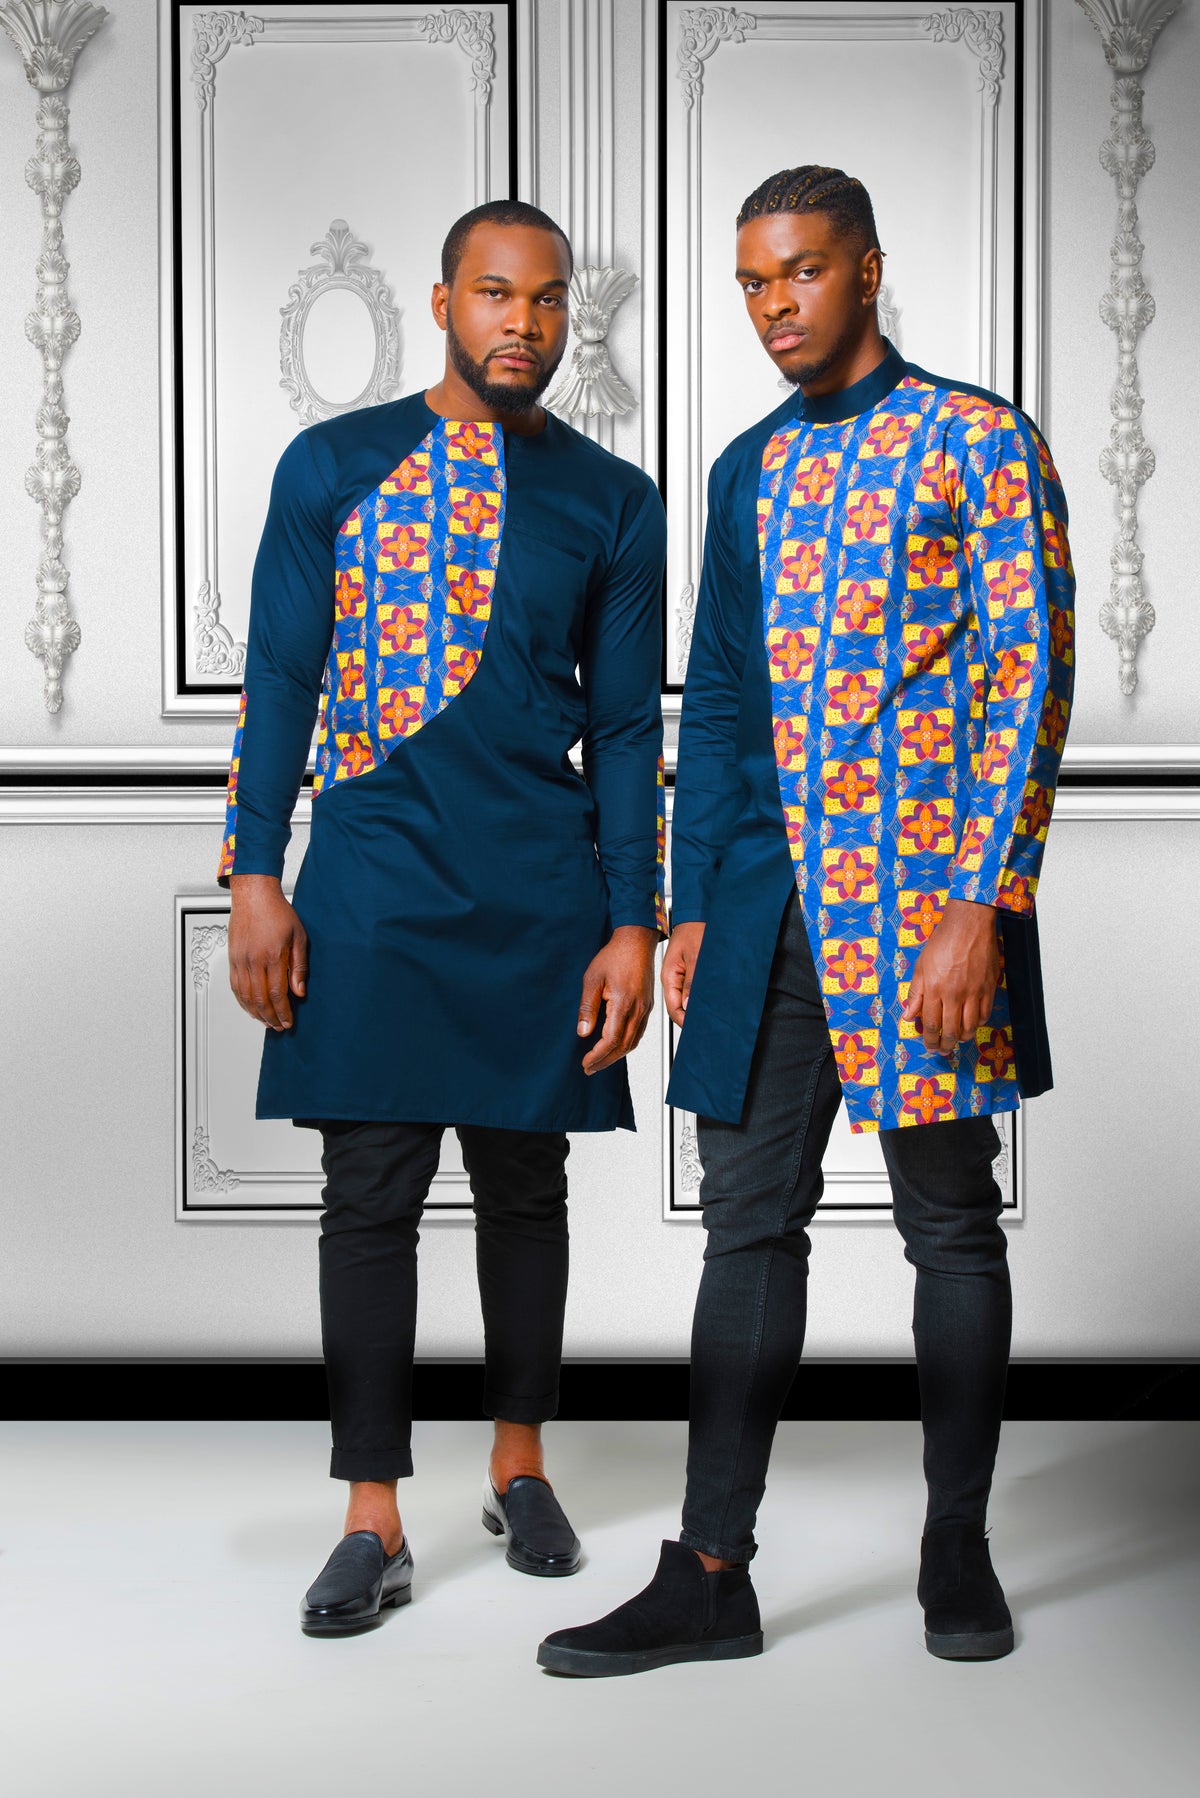 ALLEON offers hand-made, unique, ethical African fashion products in premium quality. Shop modern African clothing: African dresses, African skirts and more. Our Product range includes all sizes from small to extra large.